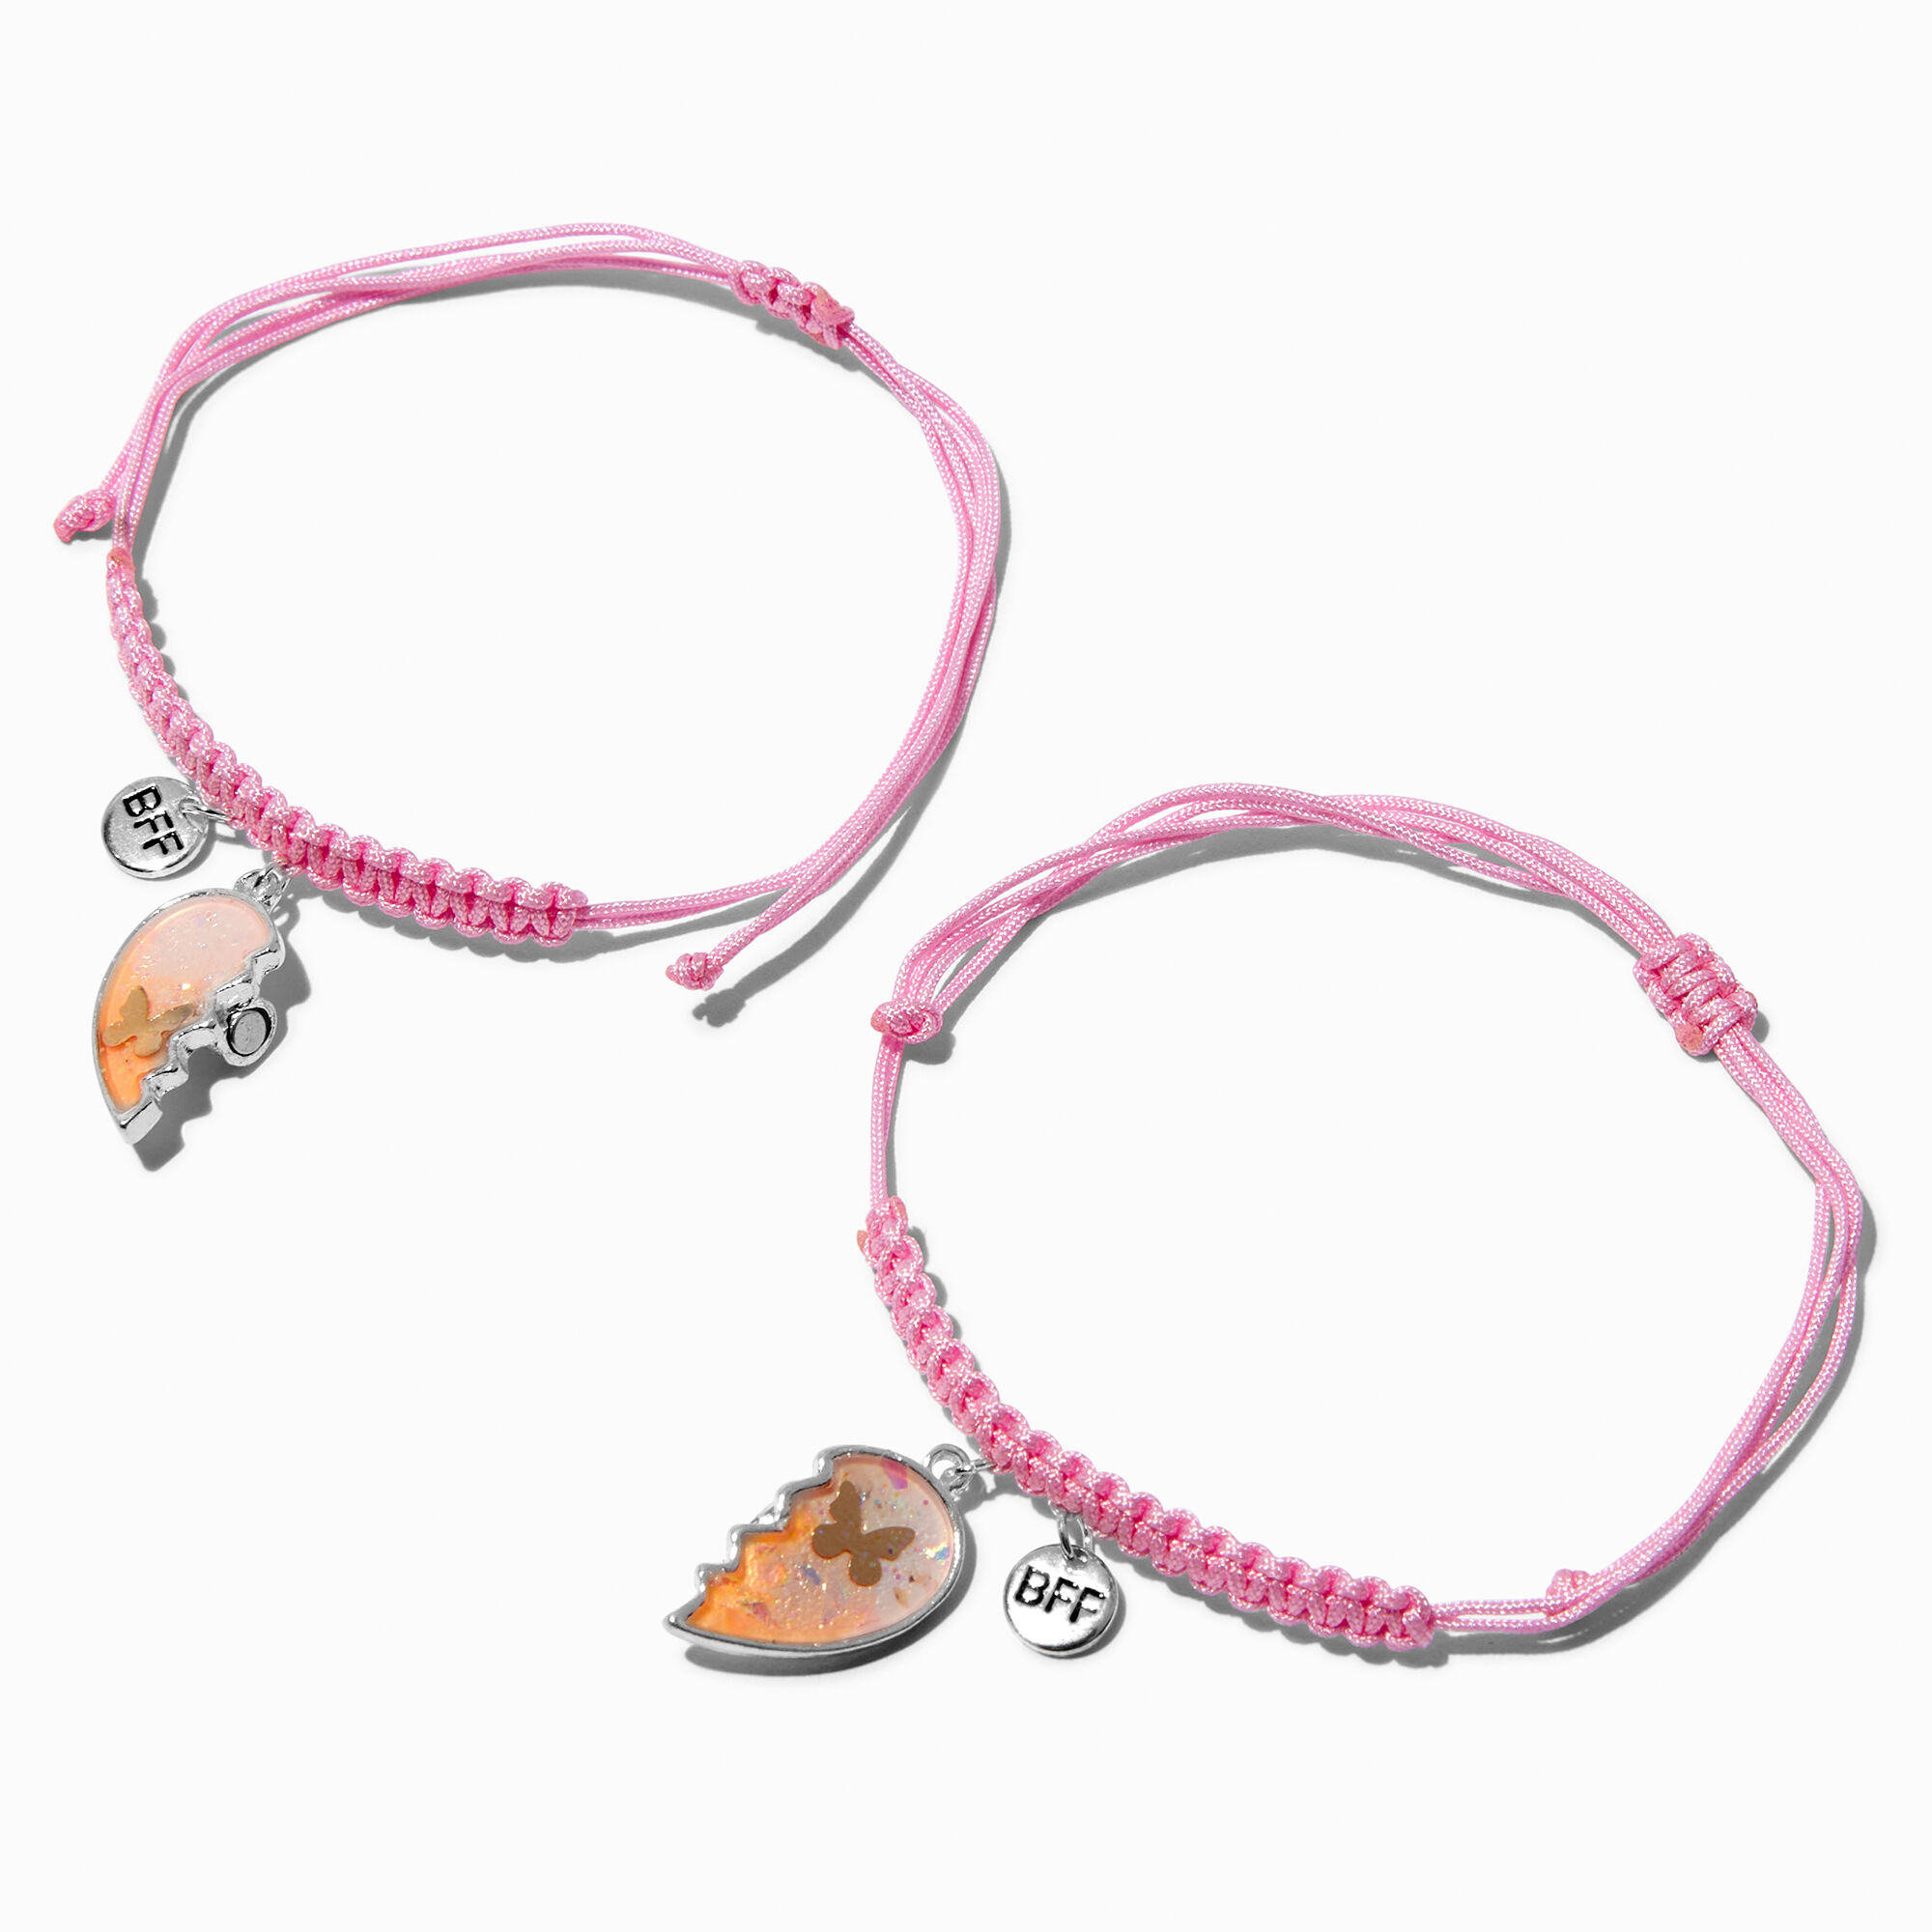 View Claires Best Friends Butterfly Heart Adjustable Cord Bracelets 2 Pack Silver information